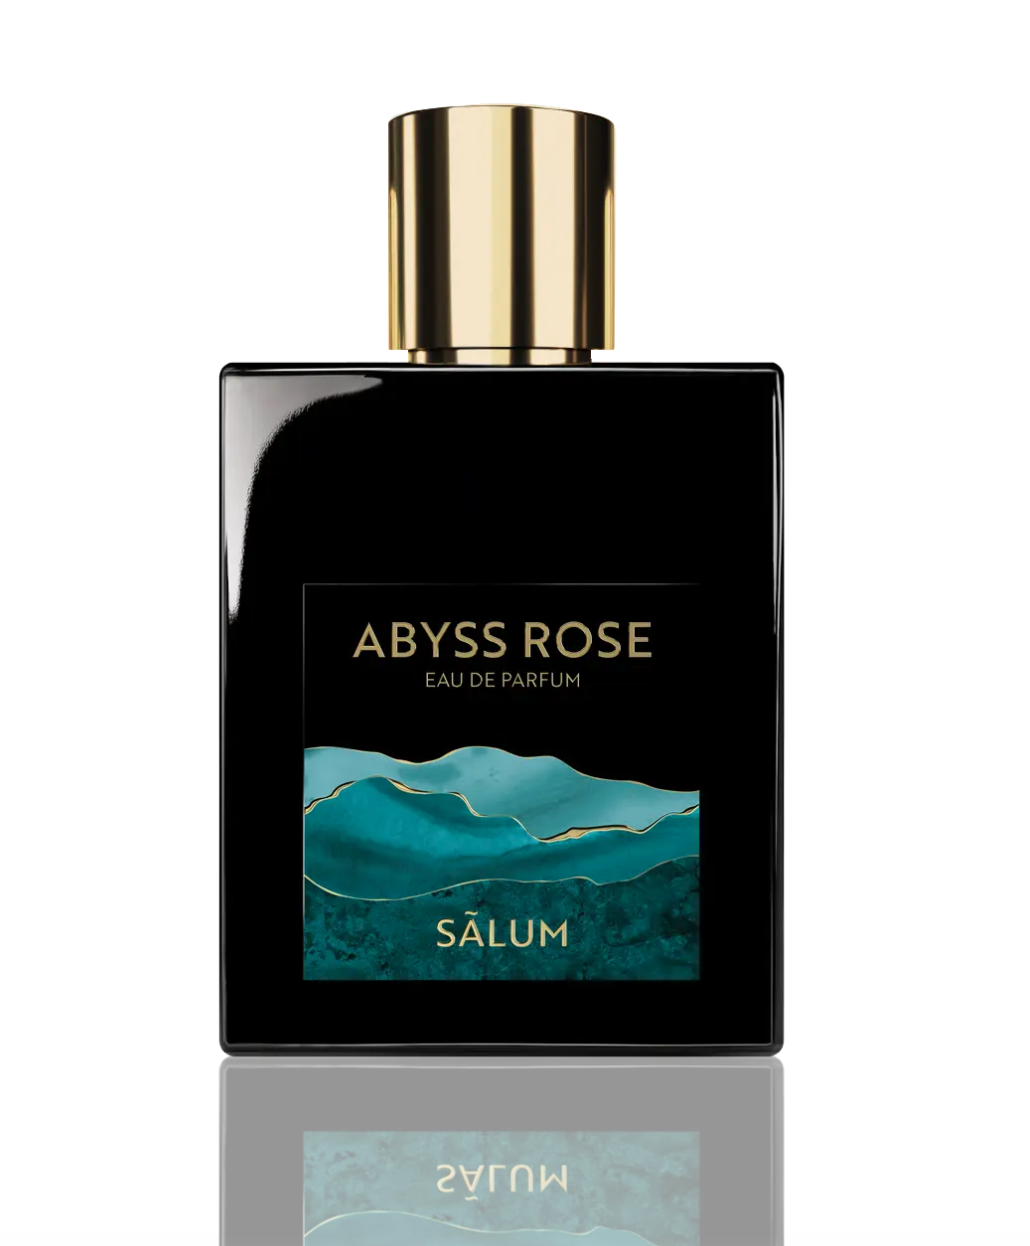 ABYSS ROSE